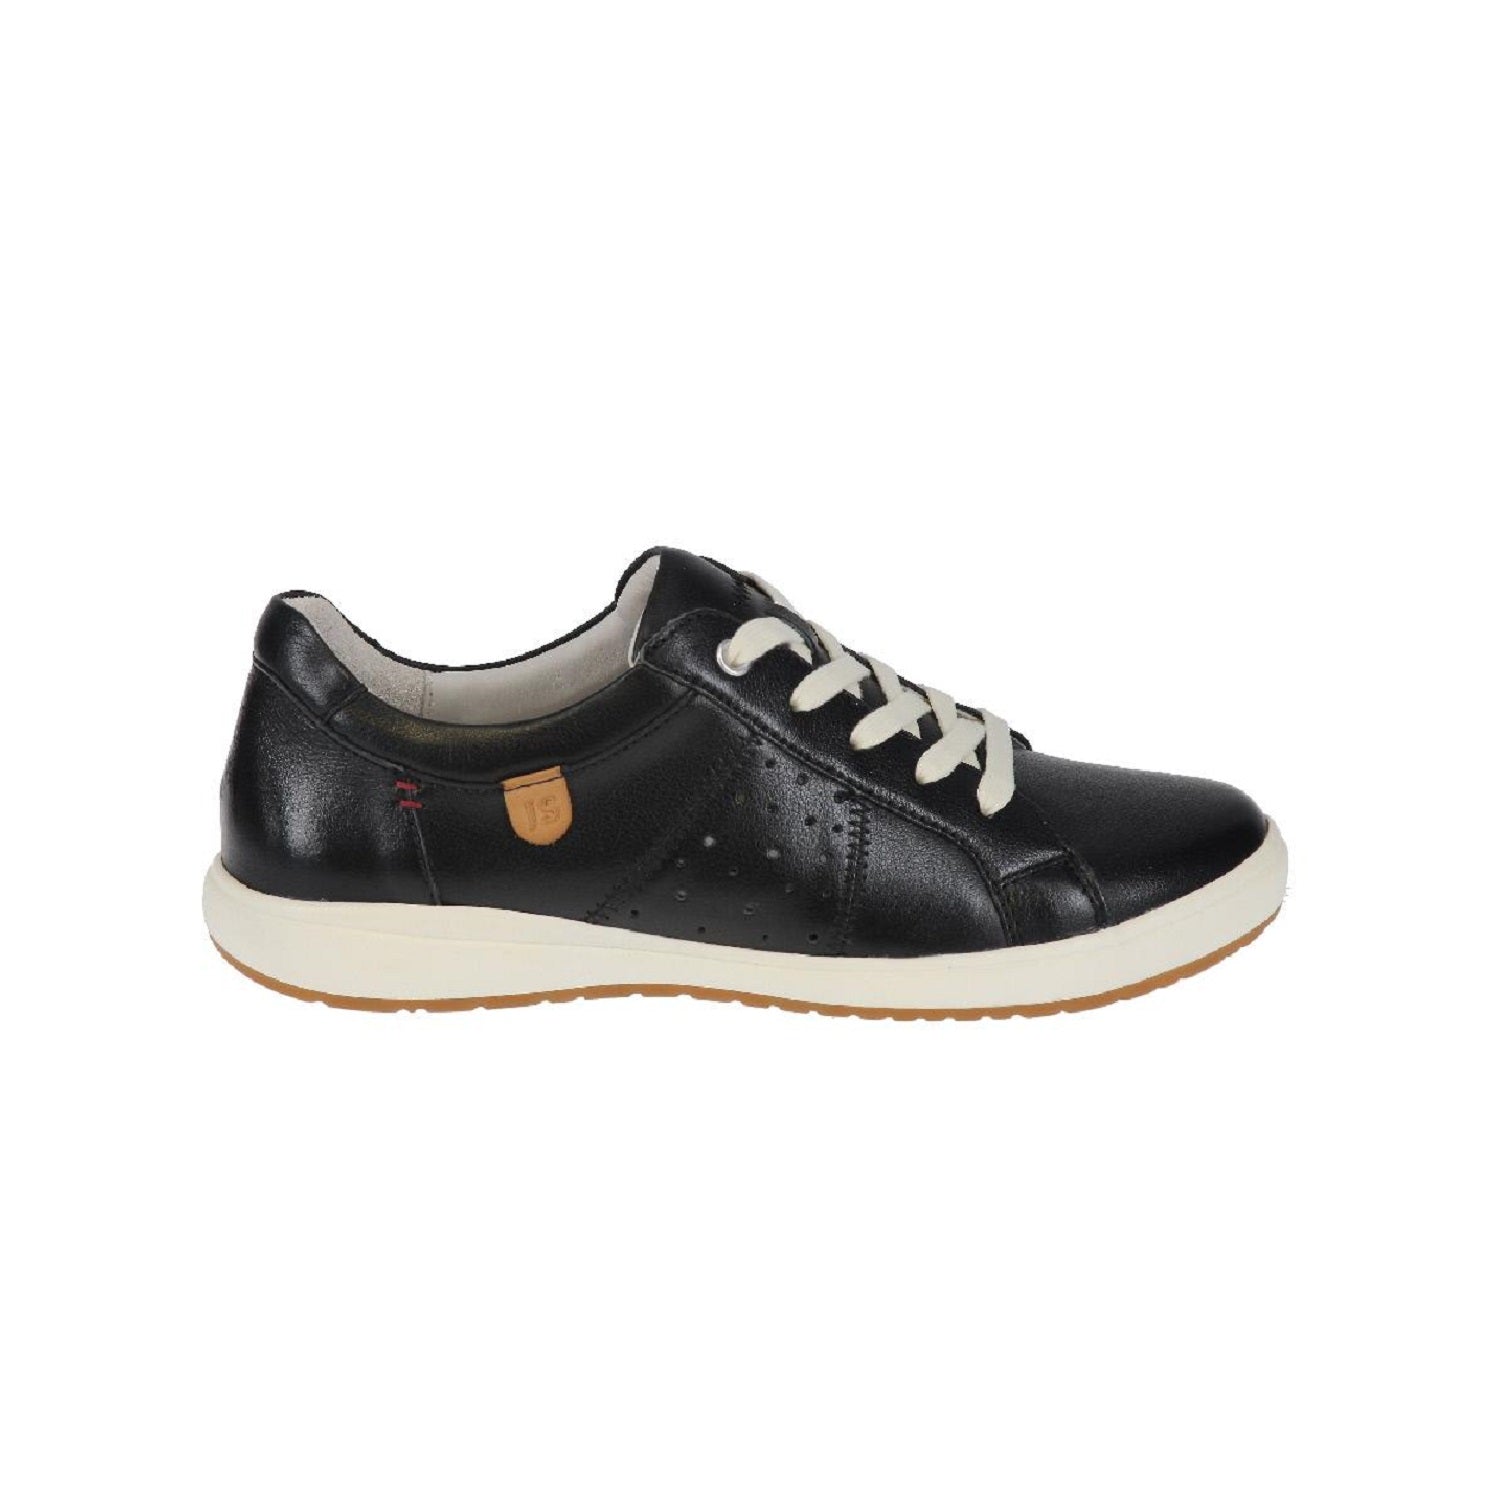 Leather sneaker in black with white trim.